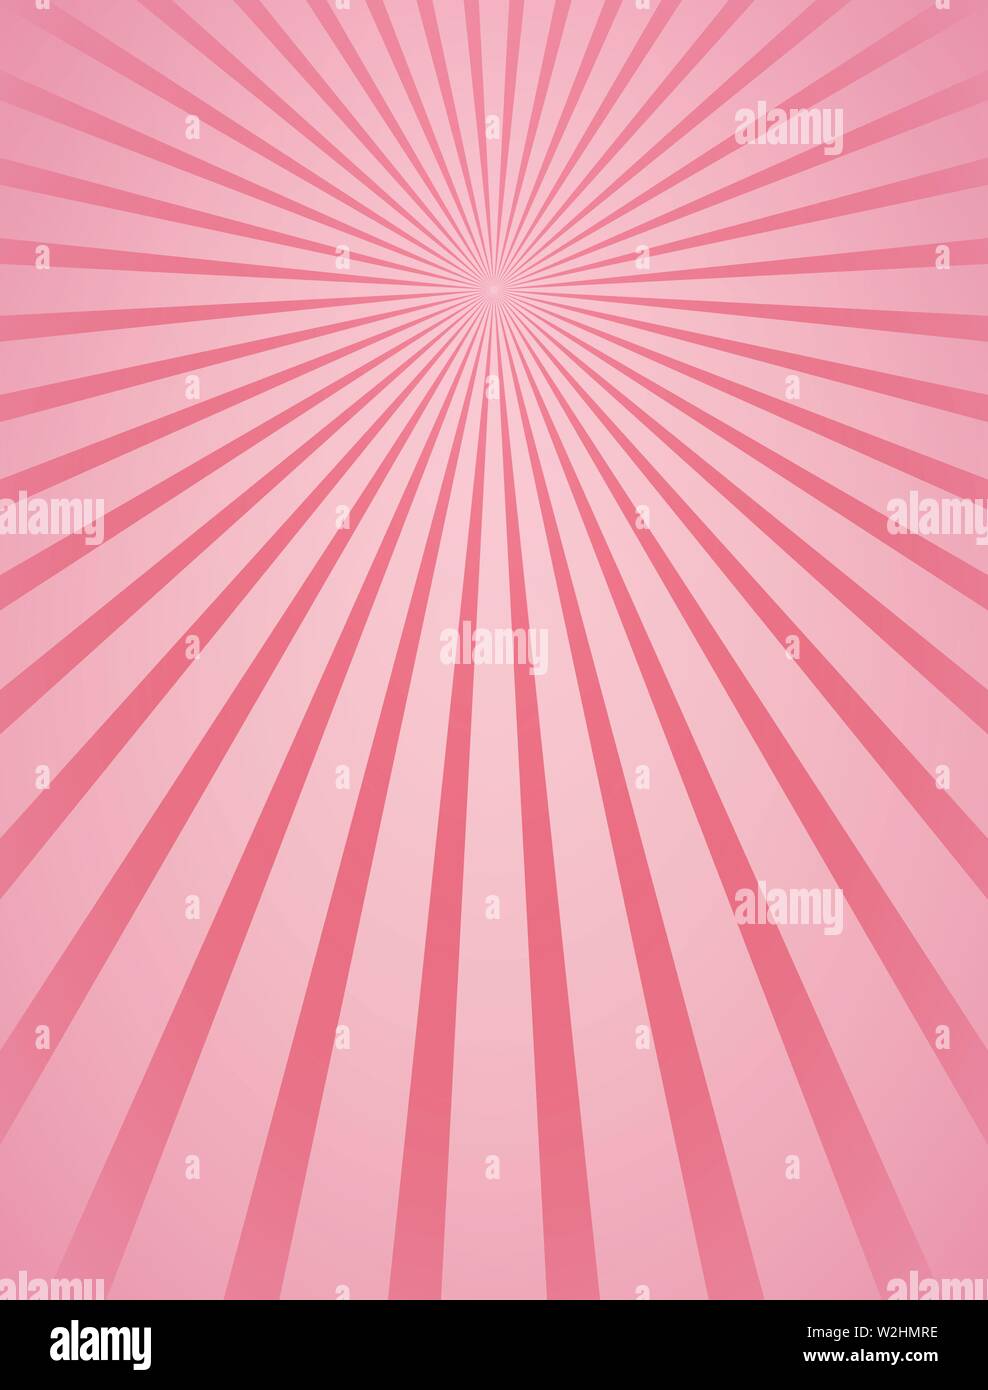 Pink rays abstract girly vector illustration radial lines background Stock Vector